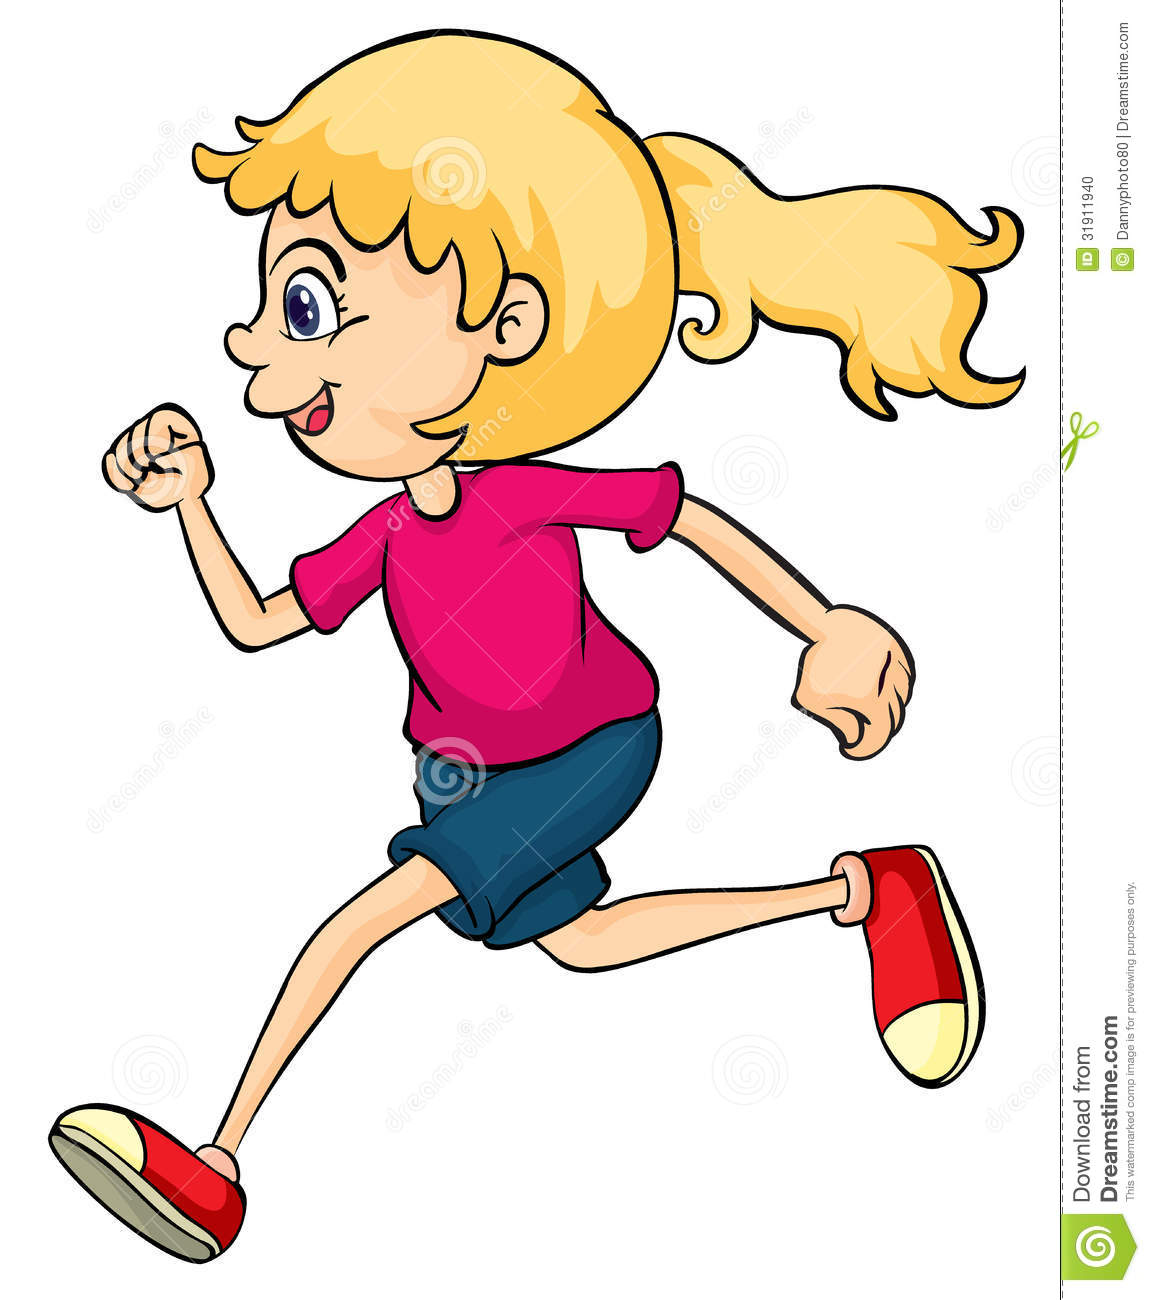 ... People Running Clipart - 